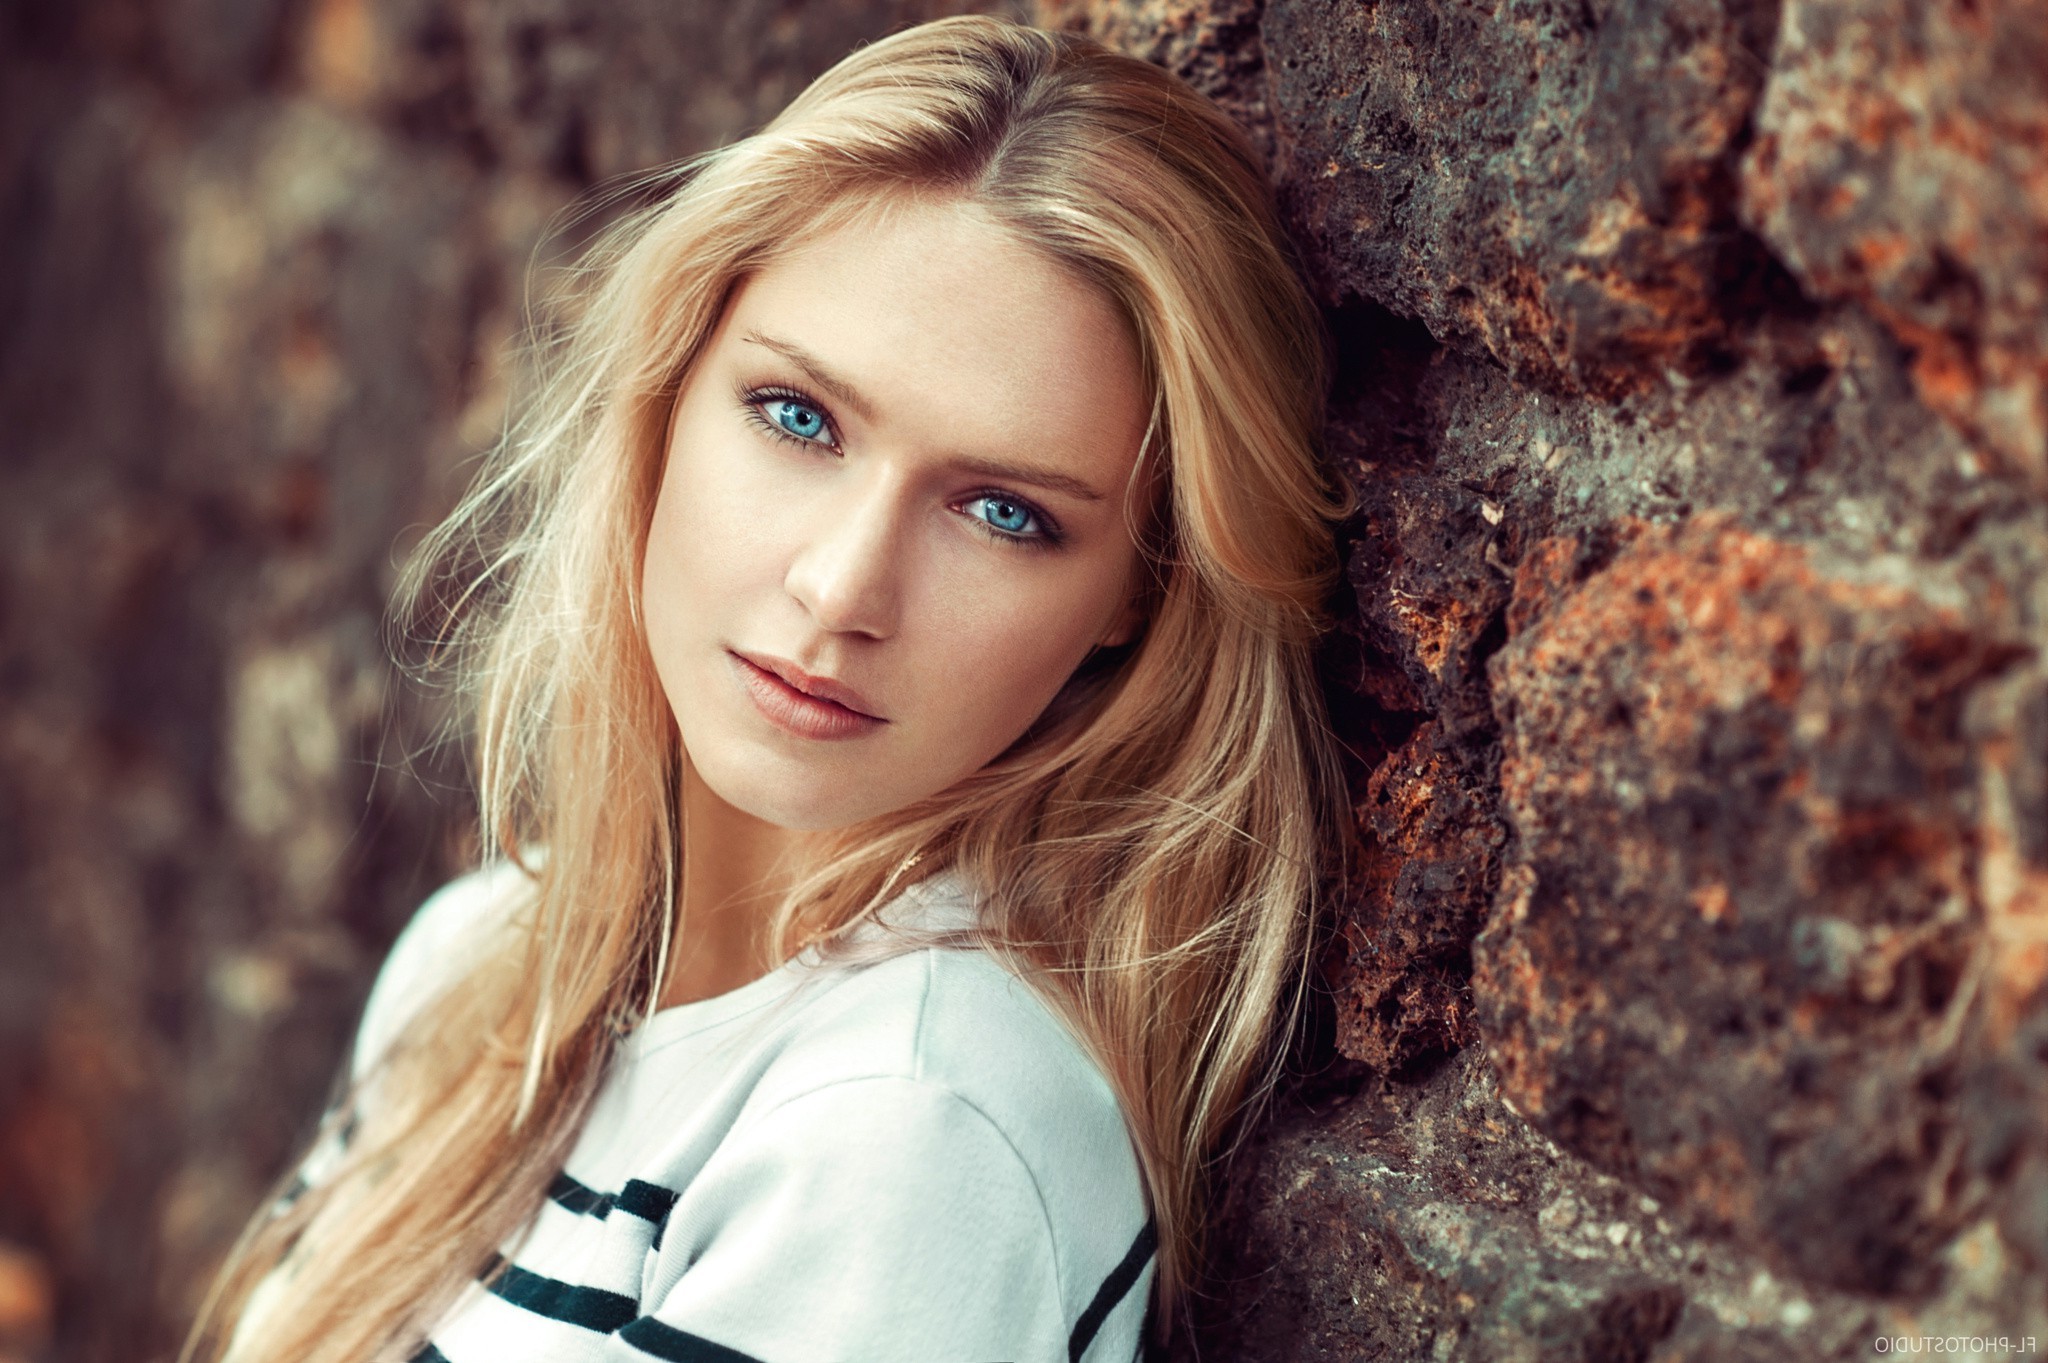 1. Beautiful Blonde Hair Models: 10 Stunning Examples - wide 4